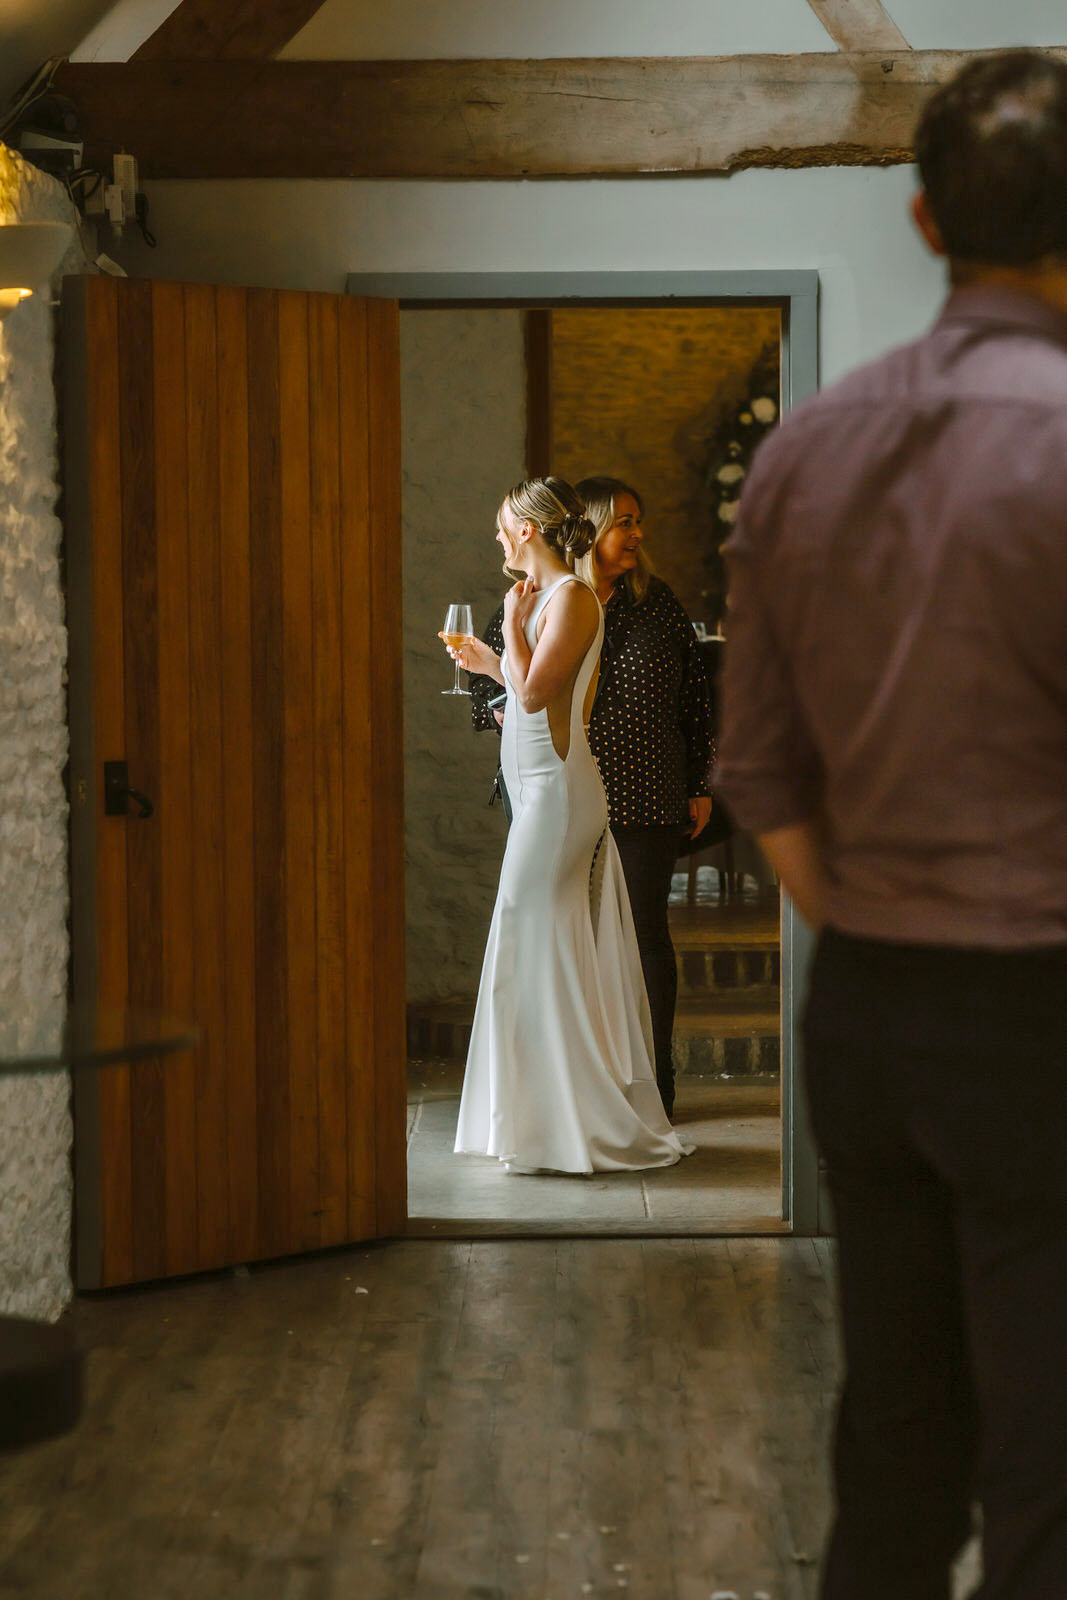 A bride and groom standing in the doorway of a barn.